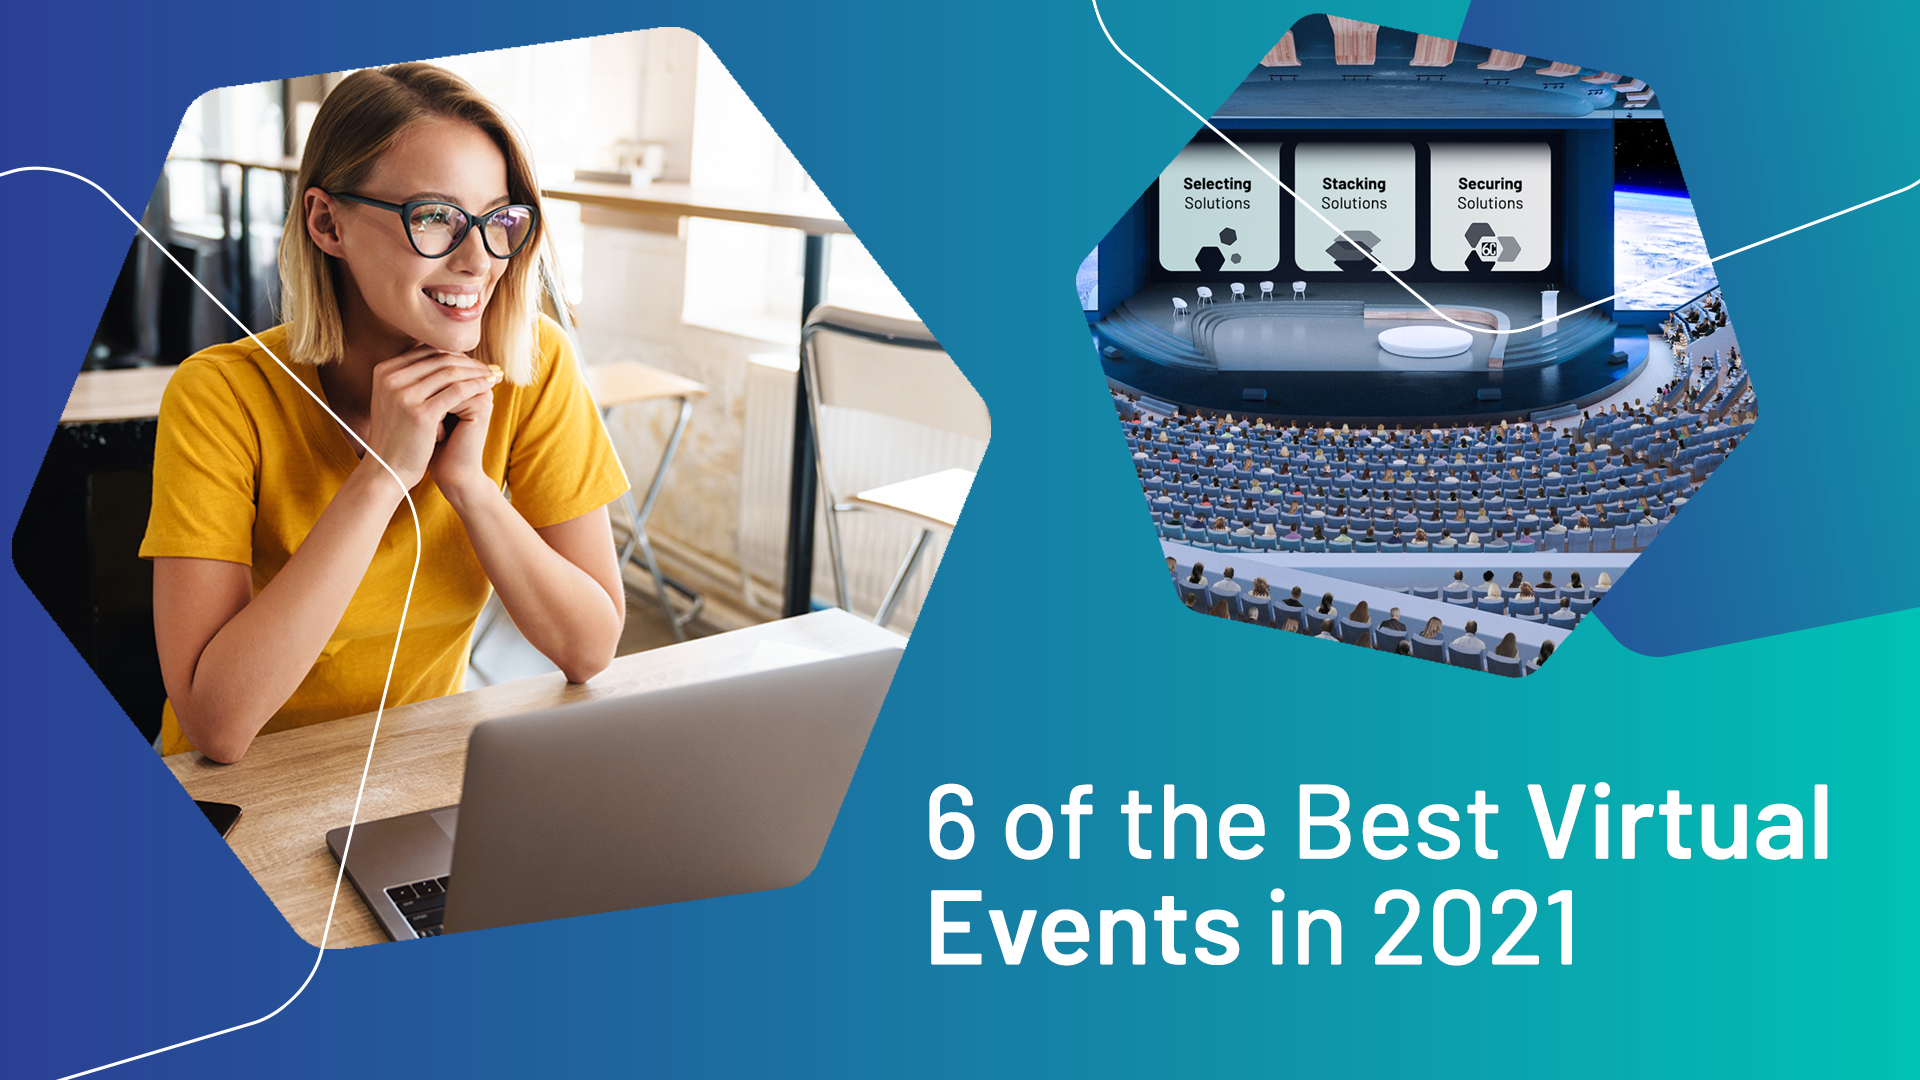 6 of the Best Virtual Events in 2021